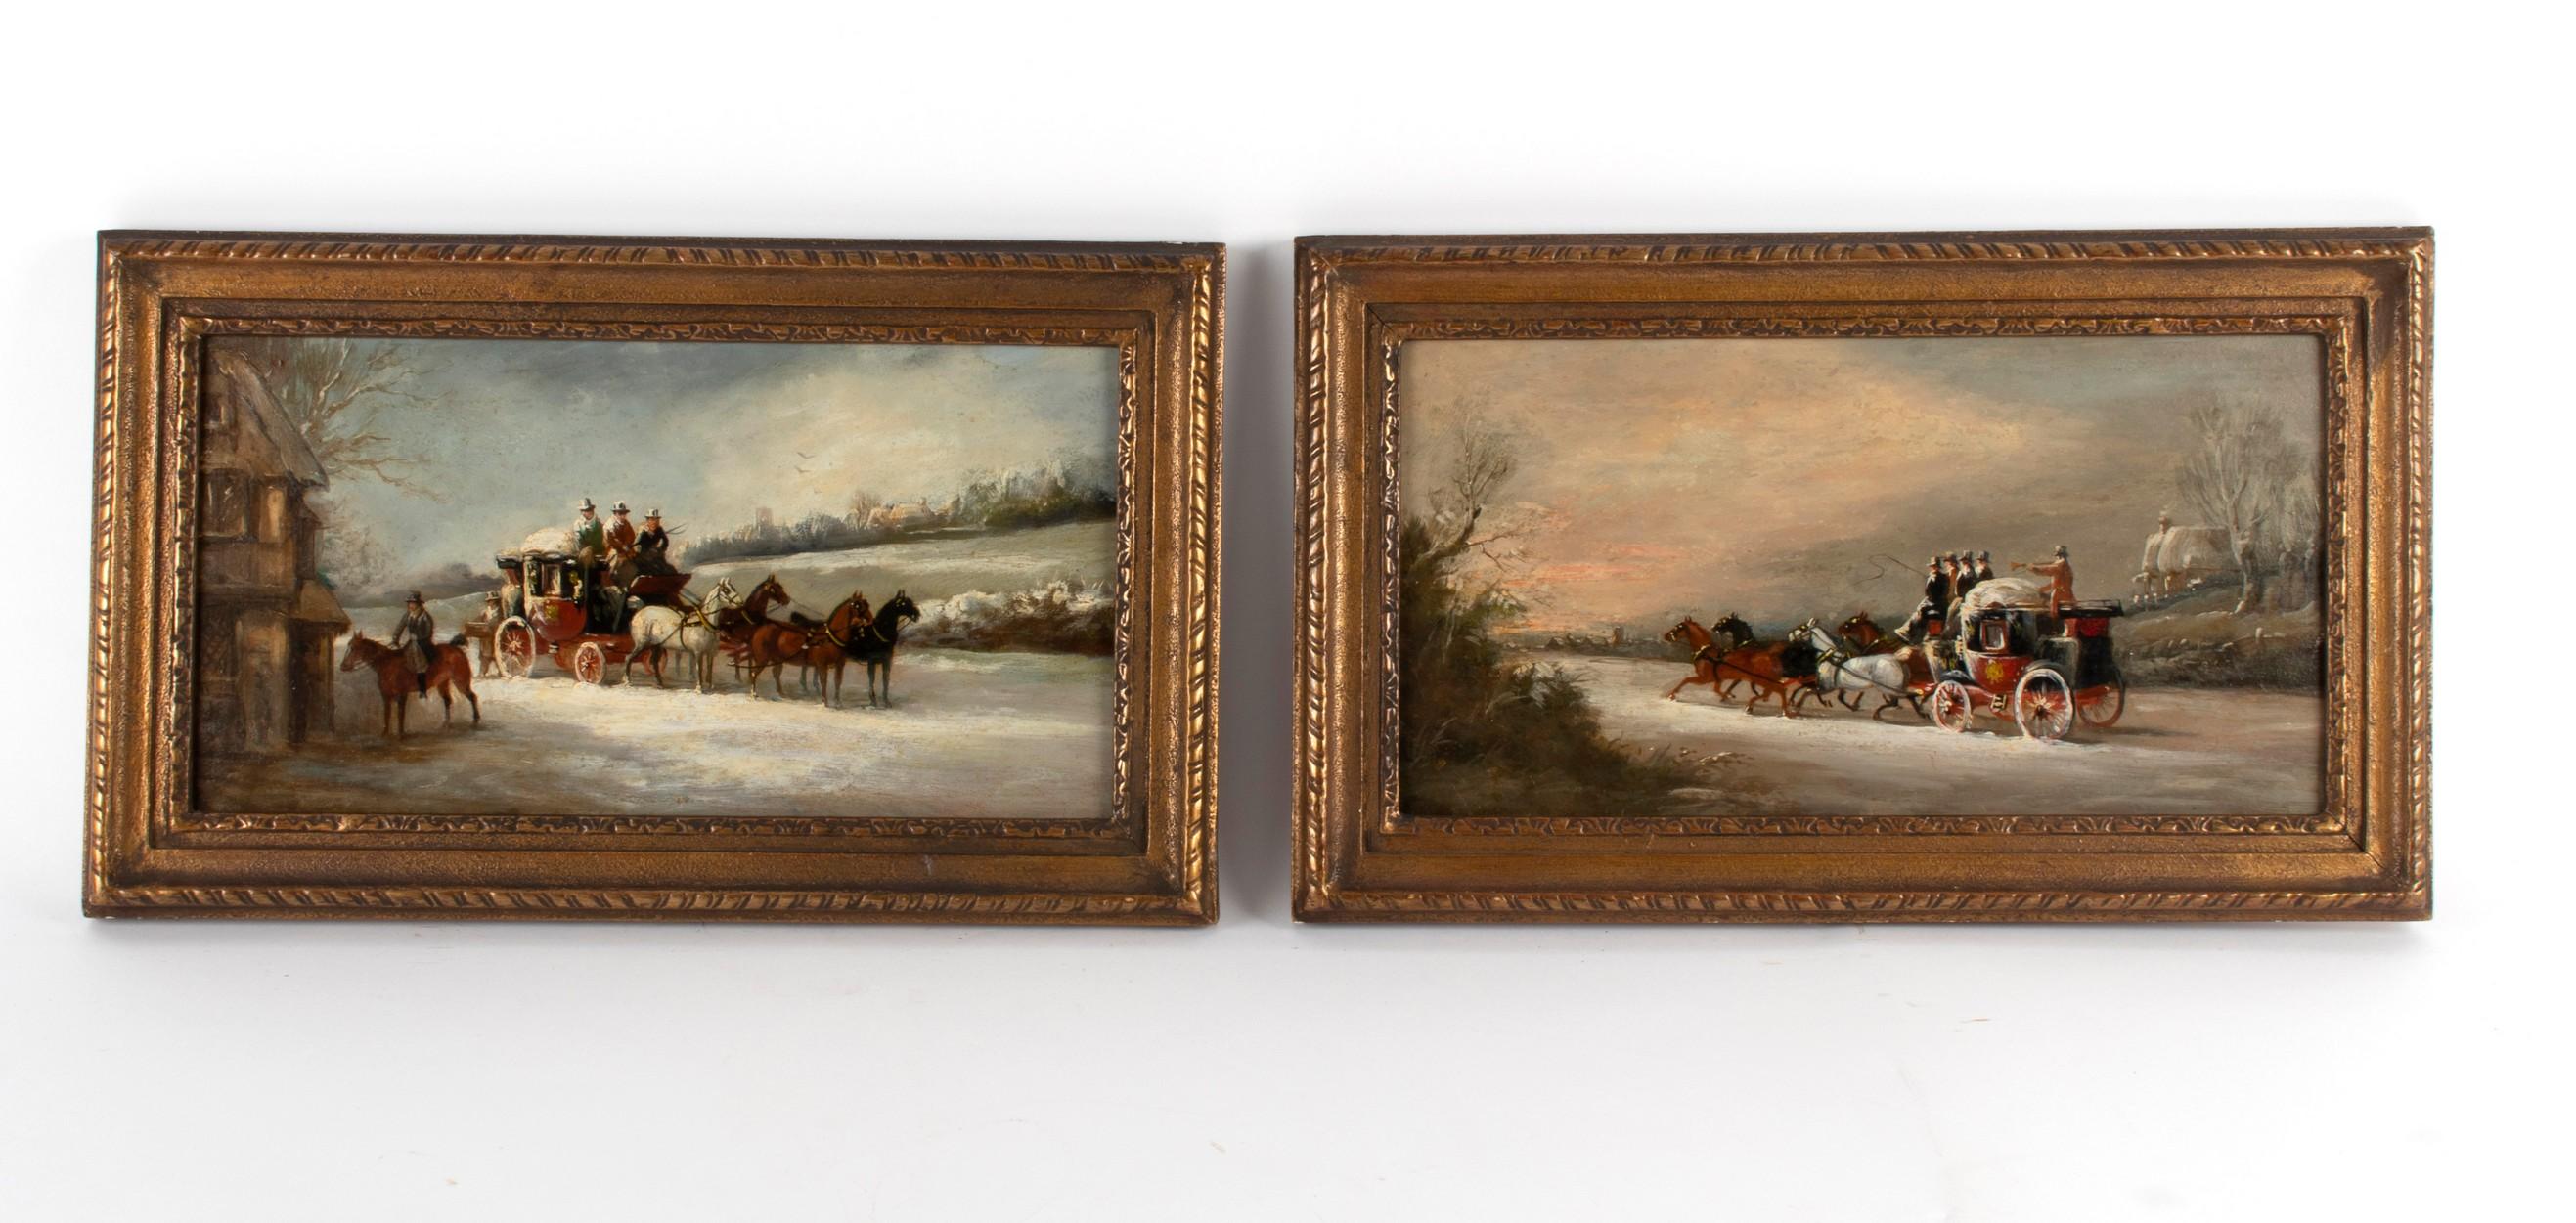 James Pollard Animal Painting - Victorian Pair of Oil Paintings on Panel - Coaching Scenes in Winter Landscapes